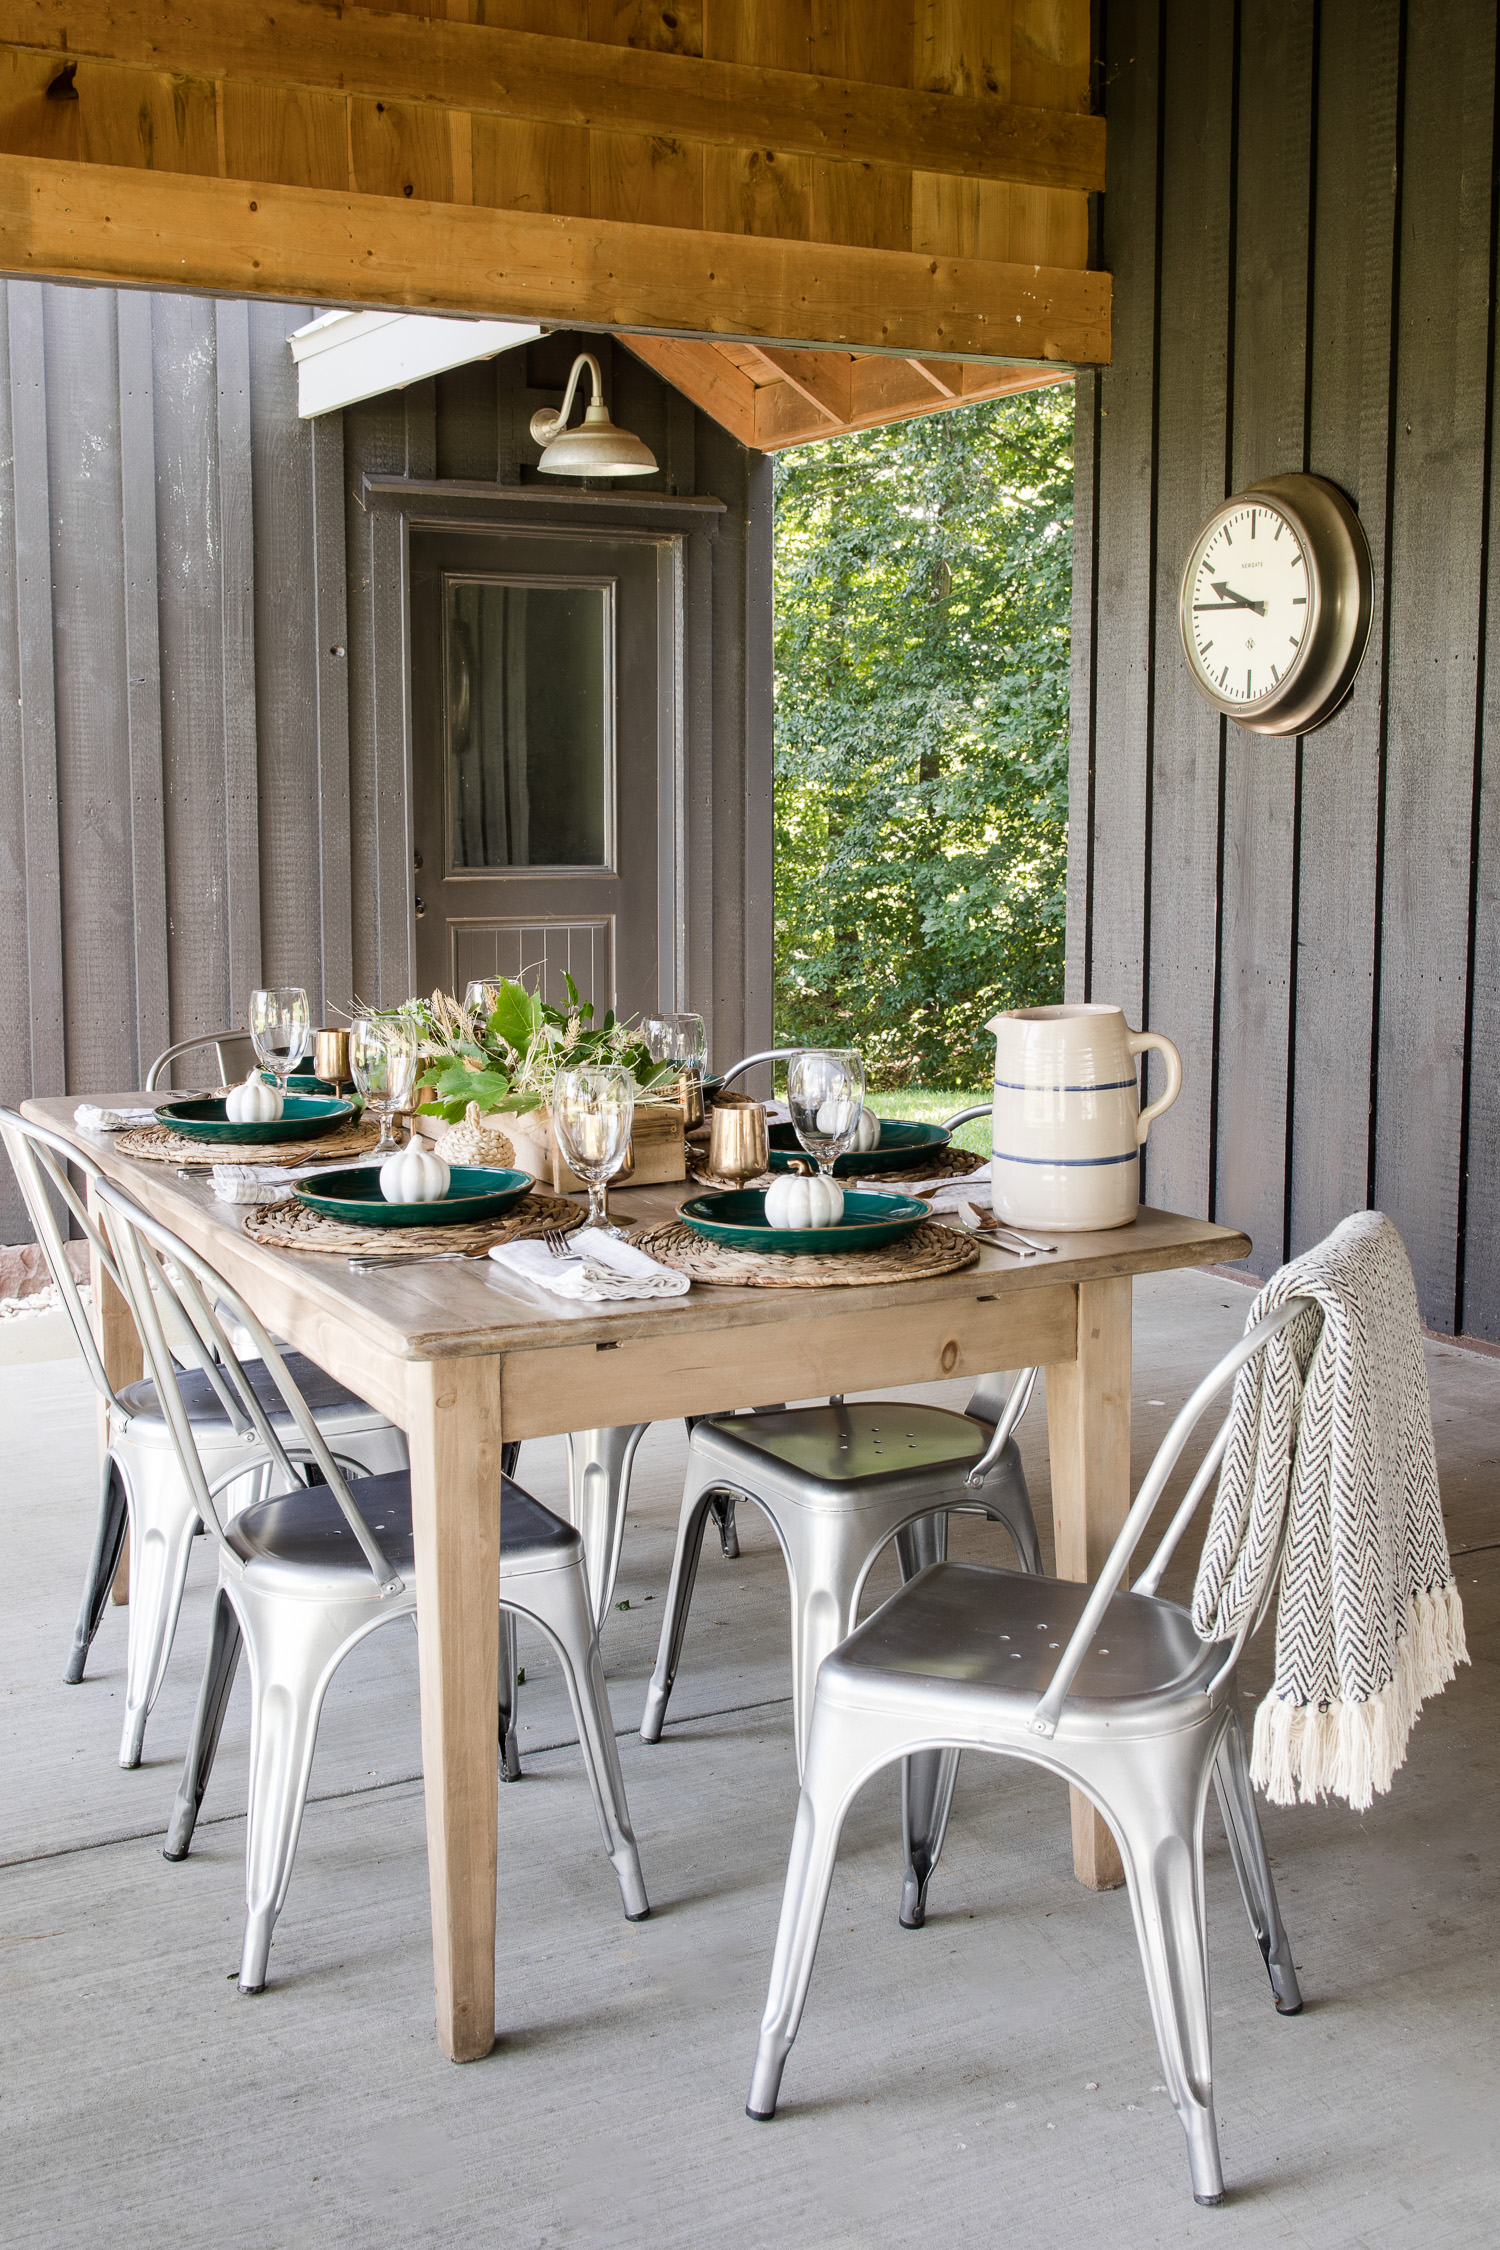 black barndominium with wood board and batten.Wood table on back patio with fall decor